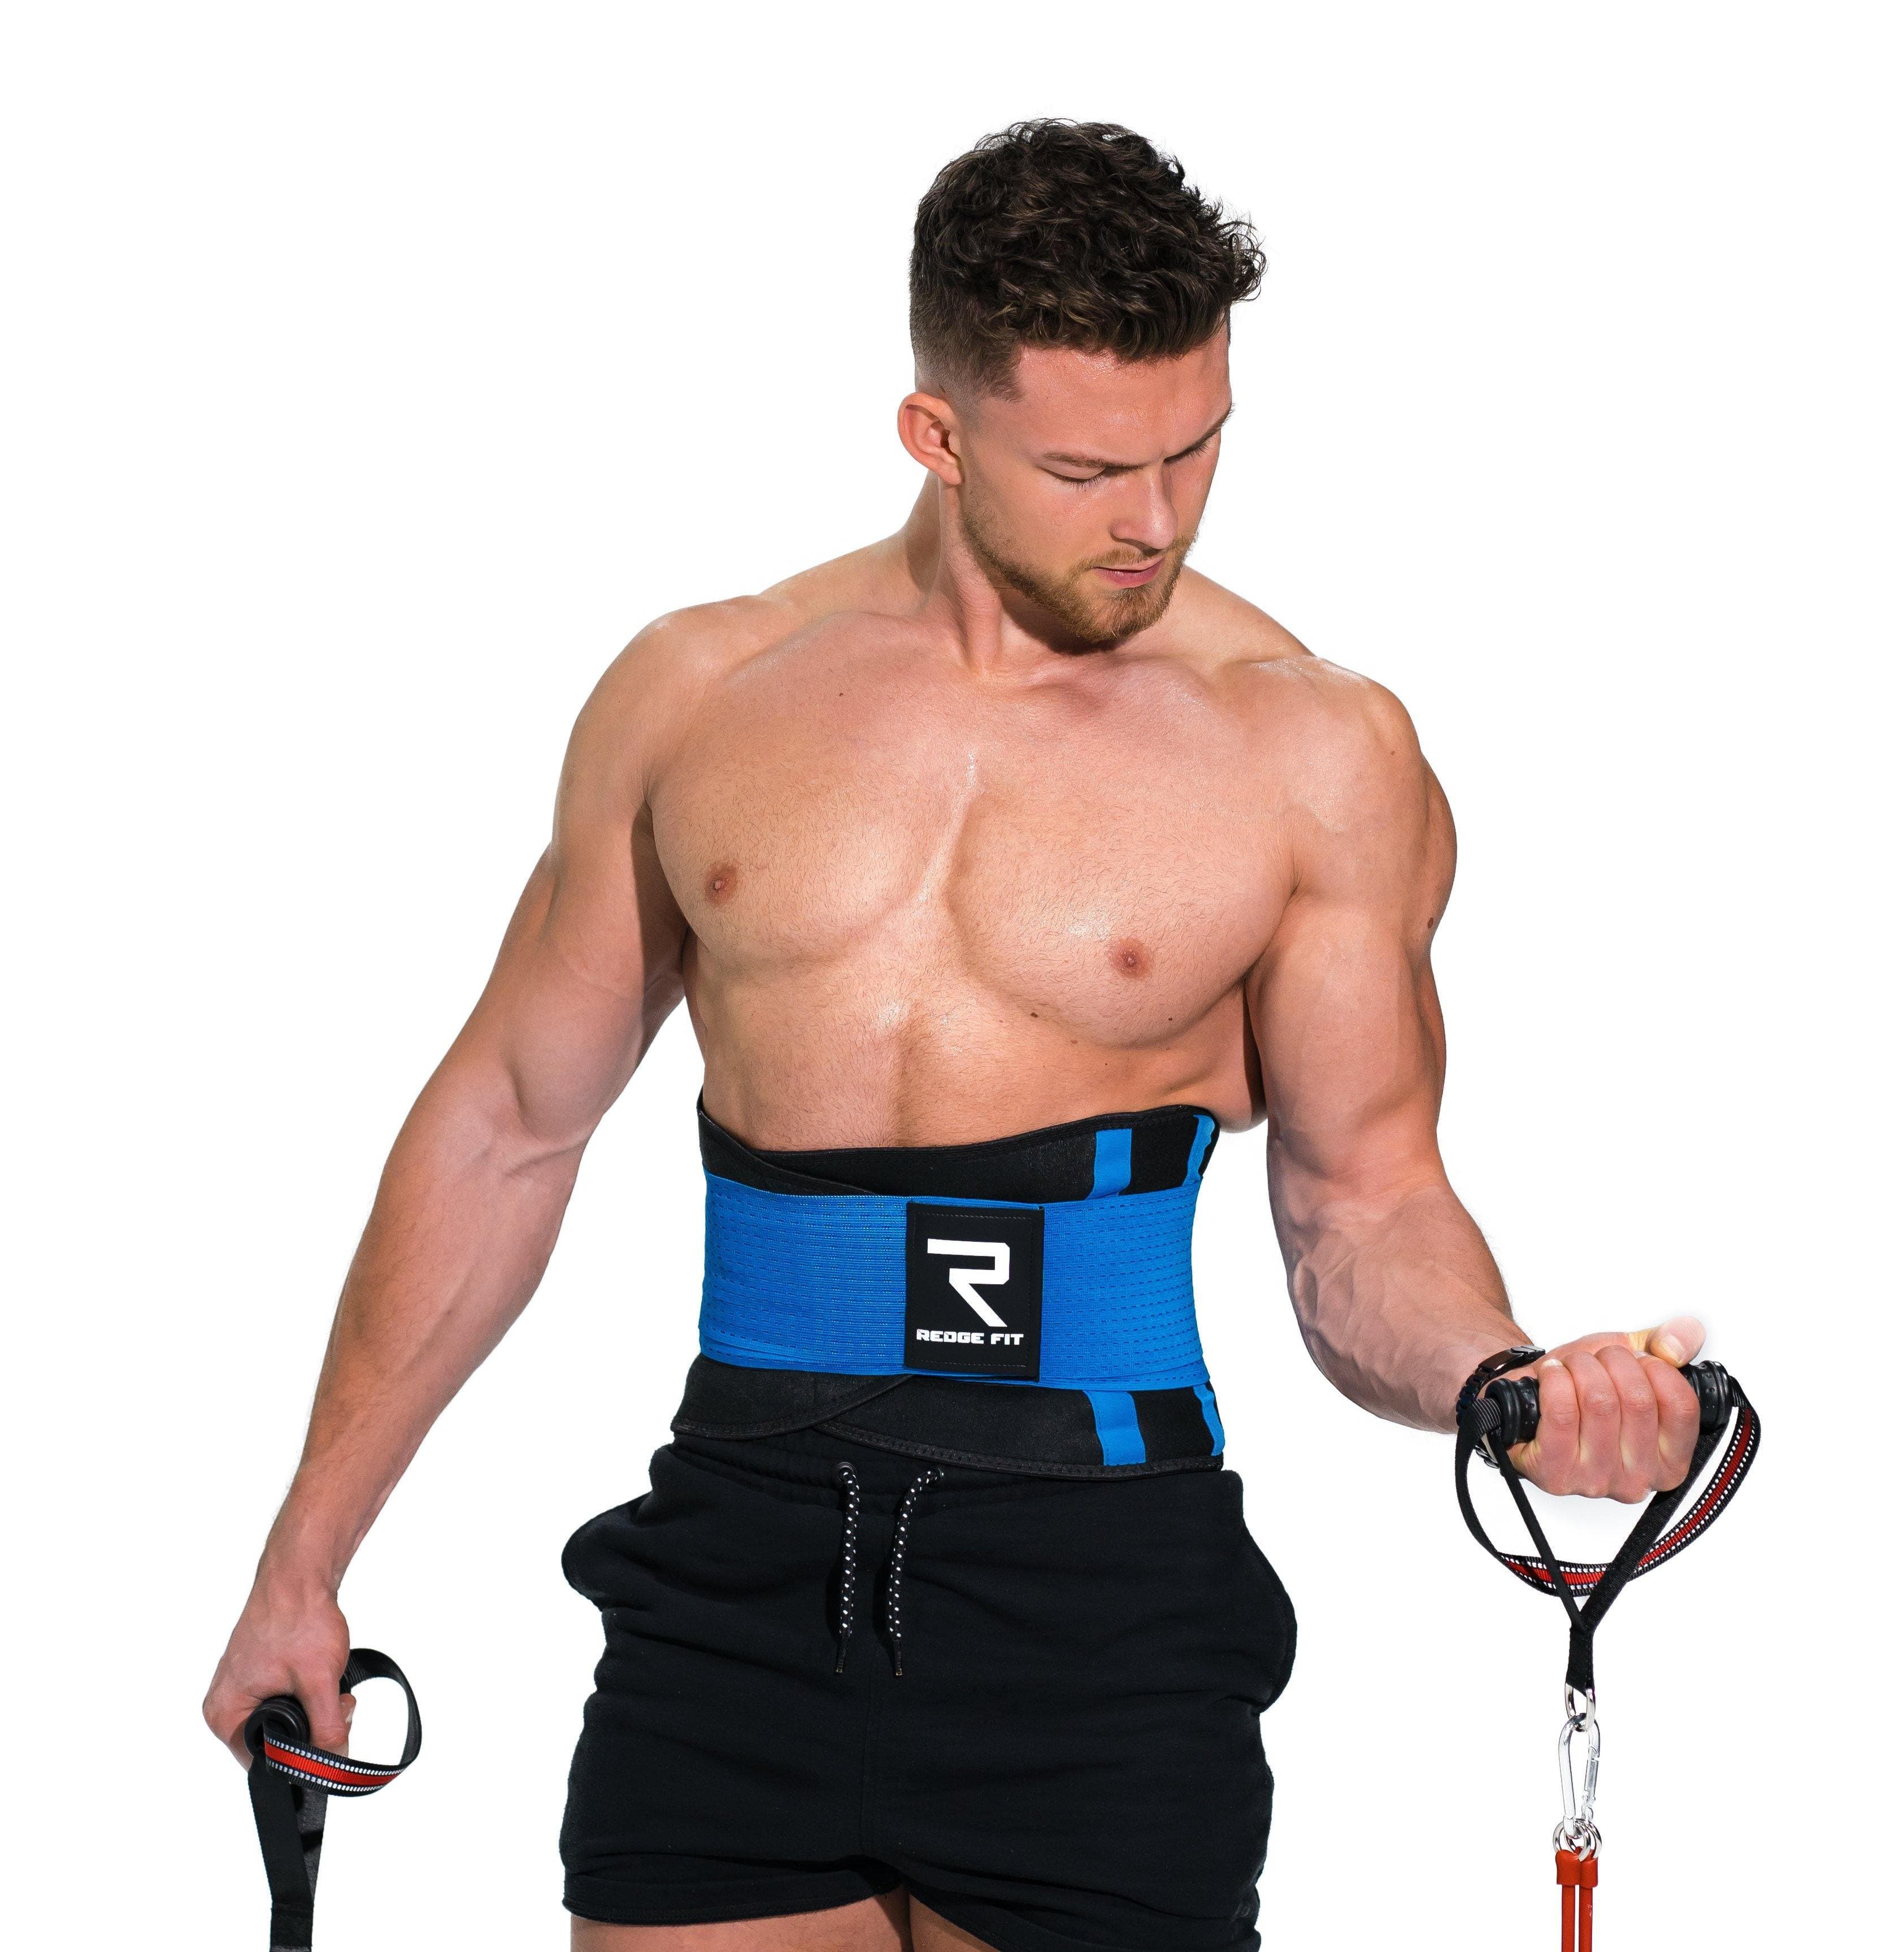 Man modeling the Redge Fit Waist Shaper Size Chart: Size Waistline (Inches) Width (Inches) XS 31.5 8.8 S 35.5 8.8 M 39.5 8.8 L 43.5 8.8 XL 47 8.8 XXL 51 8.8 Available at https://www.getredge.com/products/redge-waist-shaper-sweat-belt